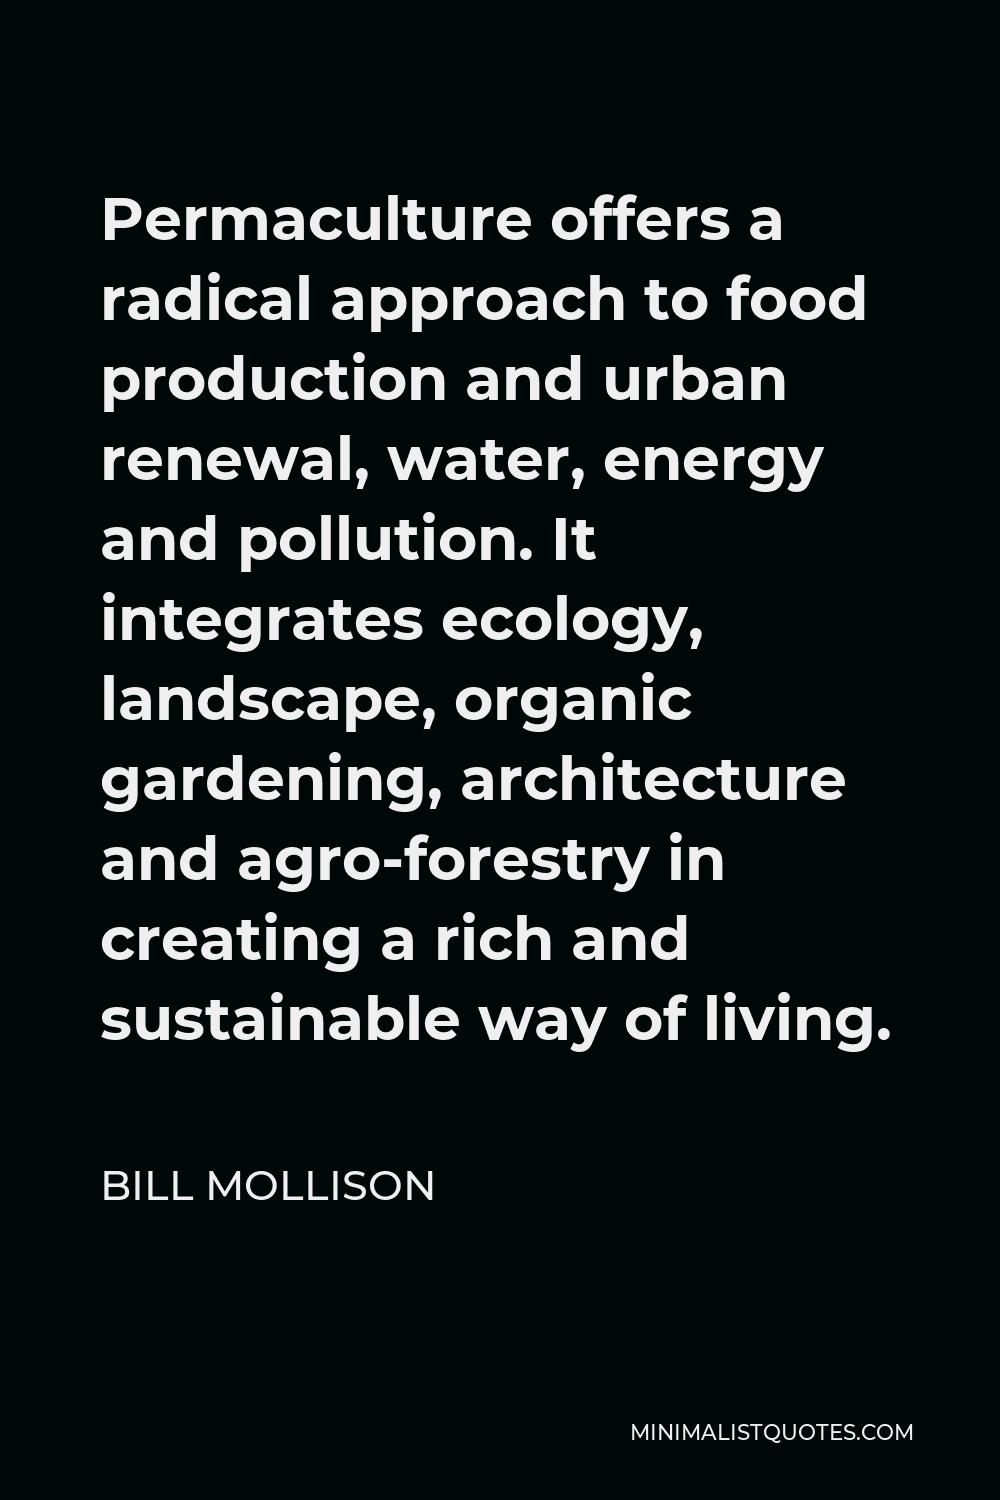 Bill Mollison Quote - Permaculture offers a radical approach to food production and urban renewal, water, energy and pollution. It integrates ecology, landscape, organic gardening, architecture and agro-forestry in creating a rich and sustainable way of living.